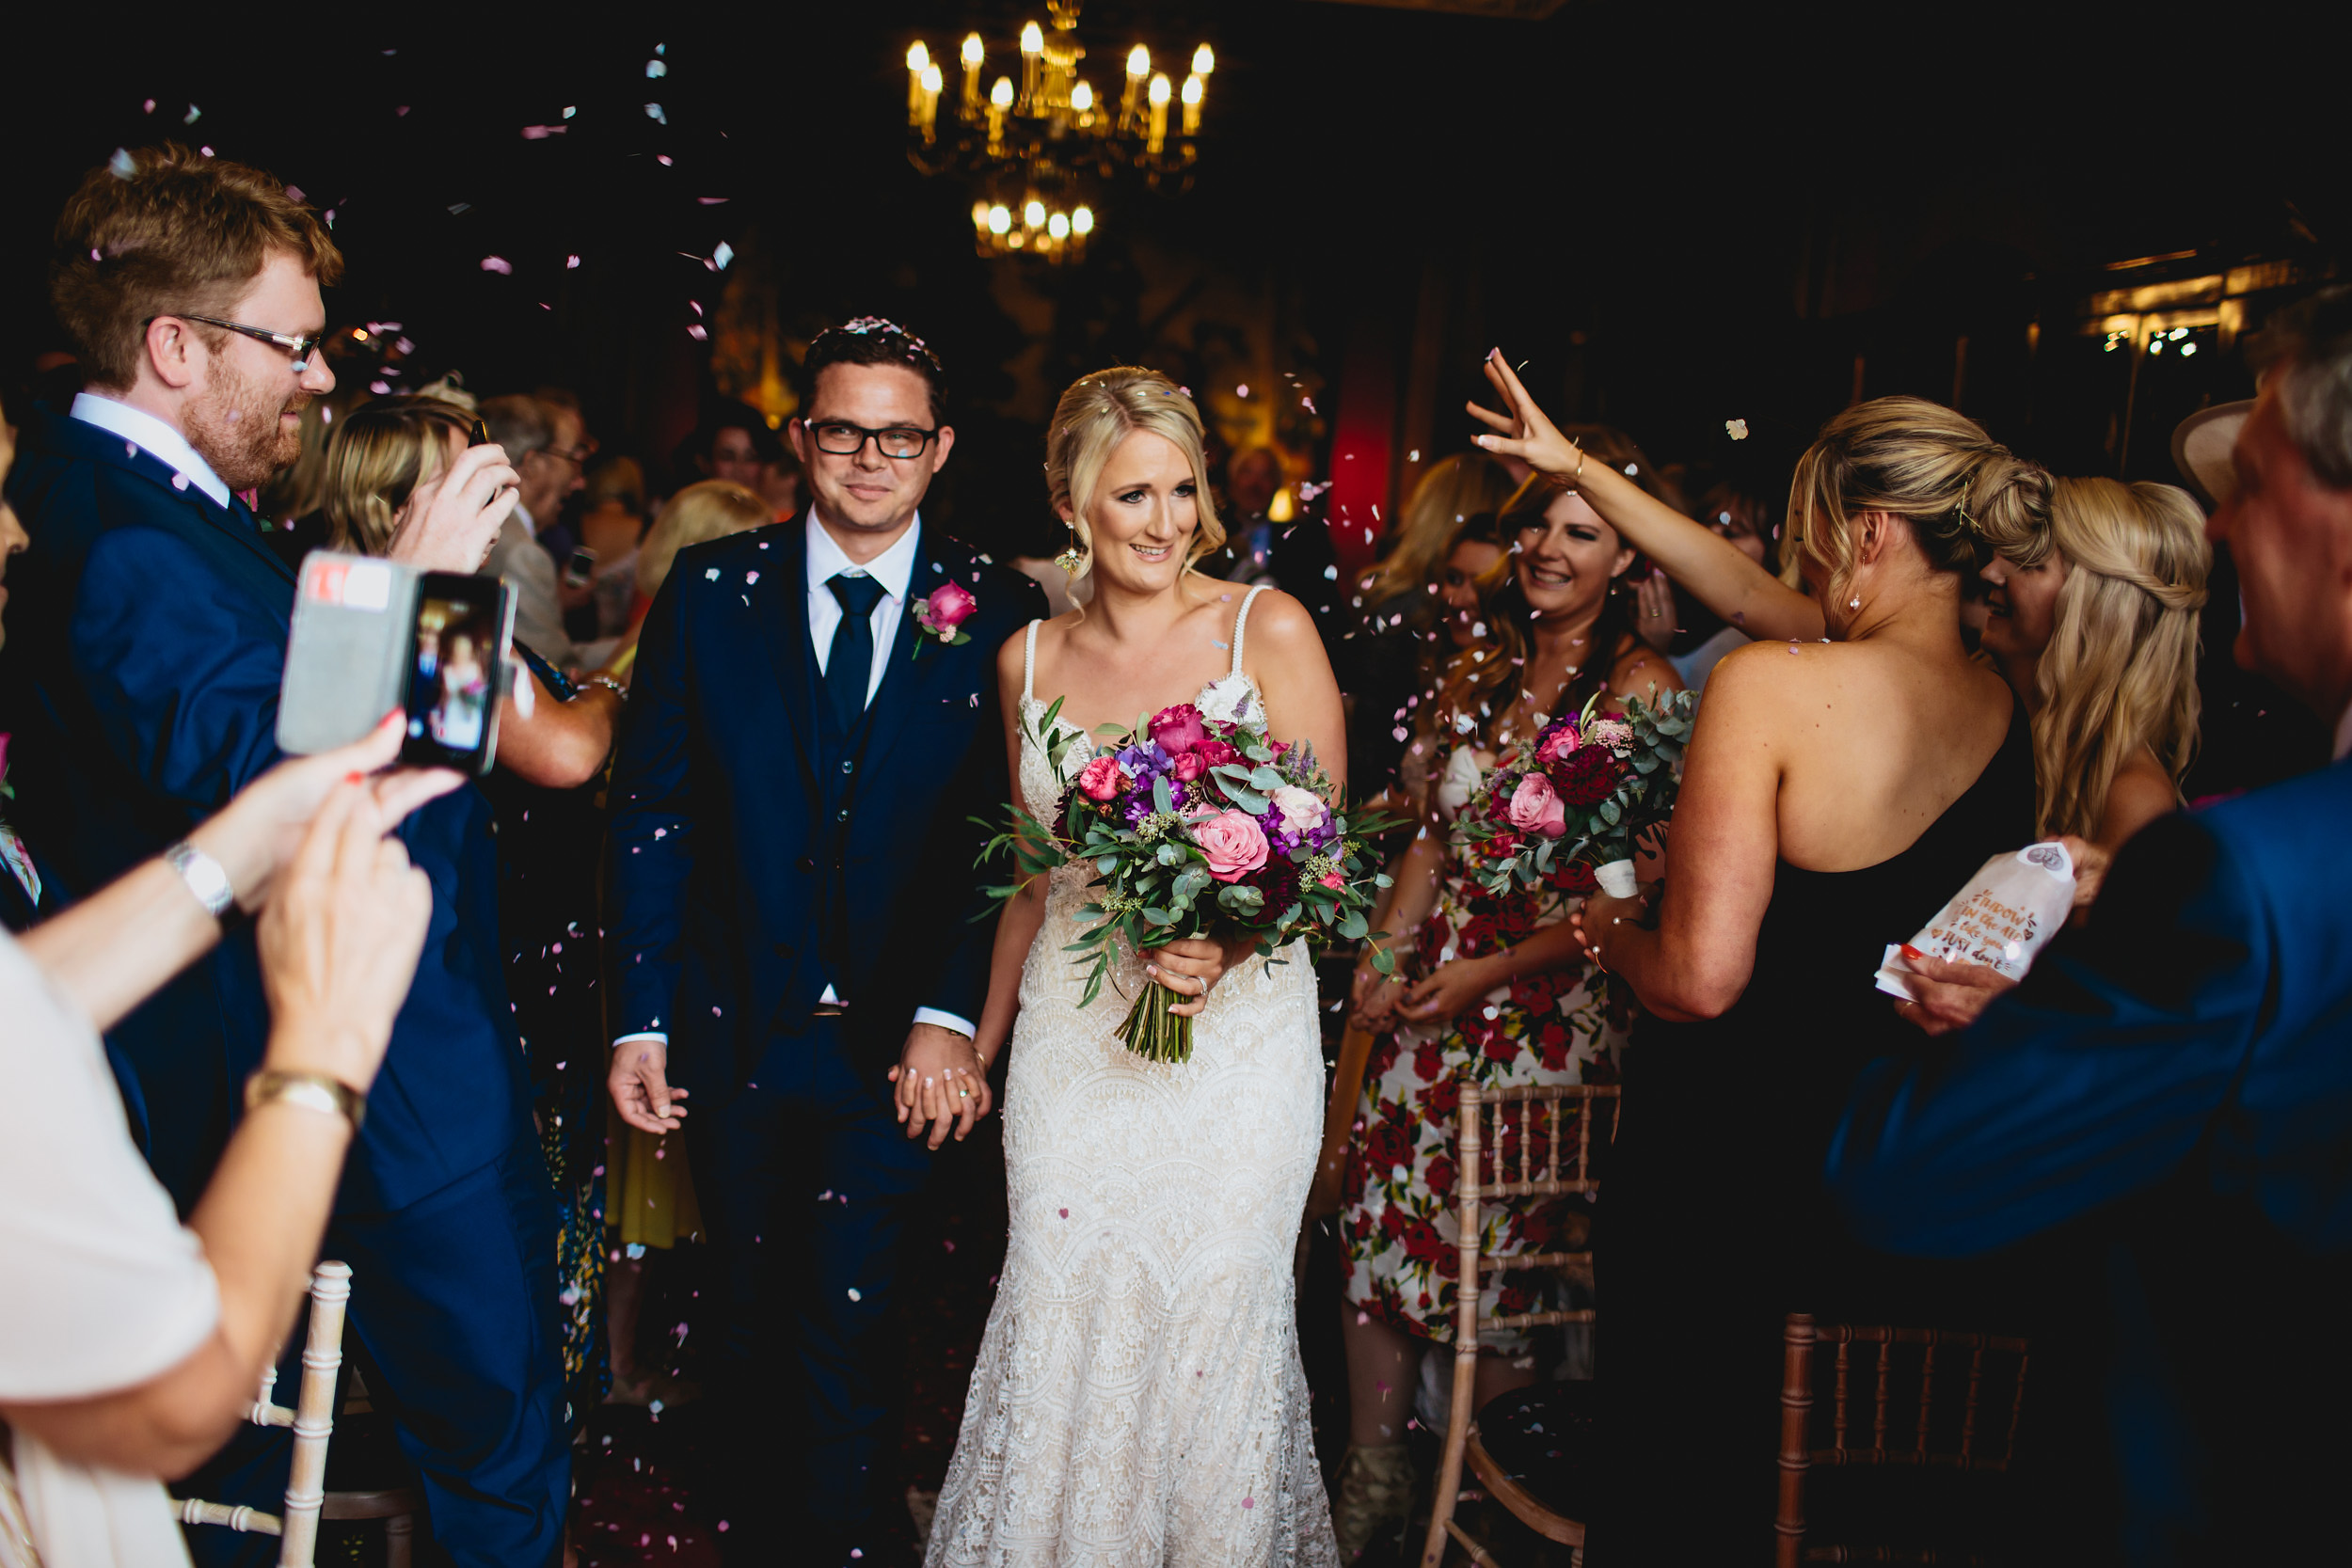 Guests throw confetti over the bride and groom at a wedding